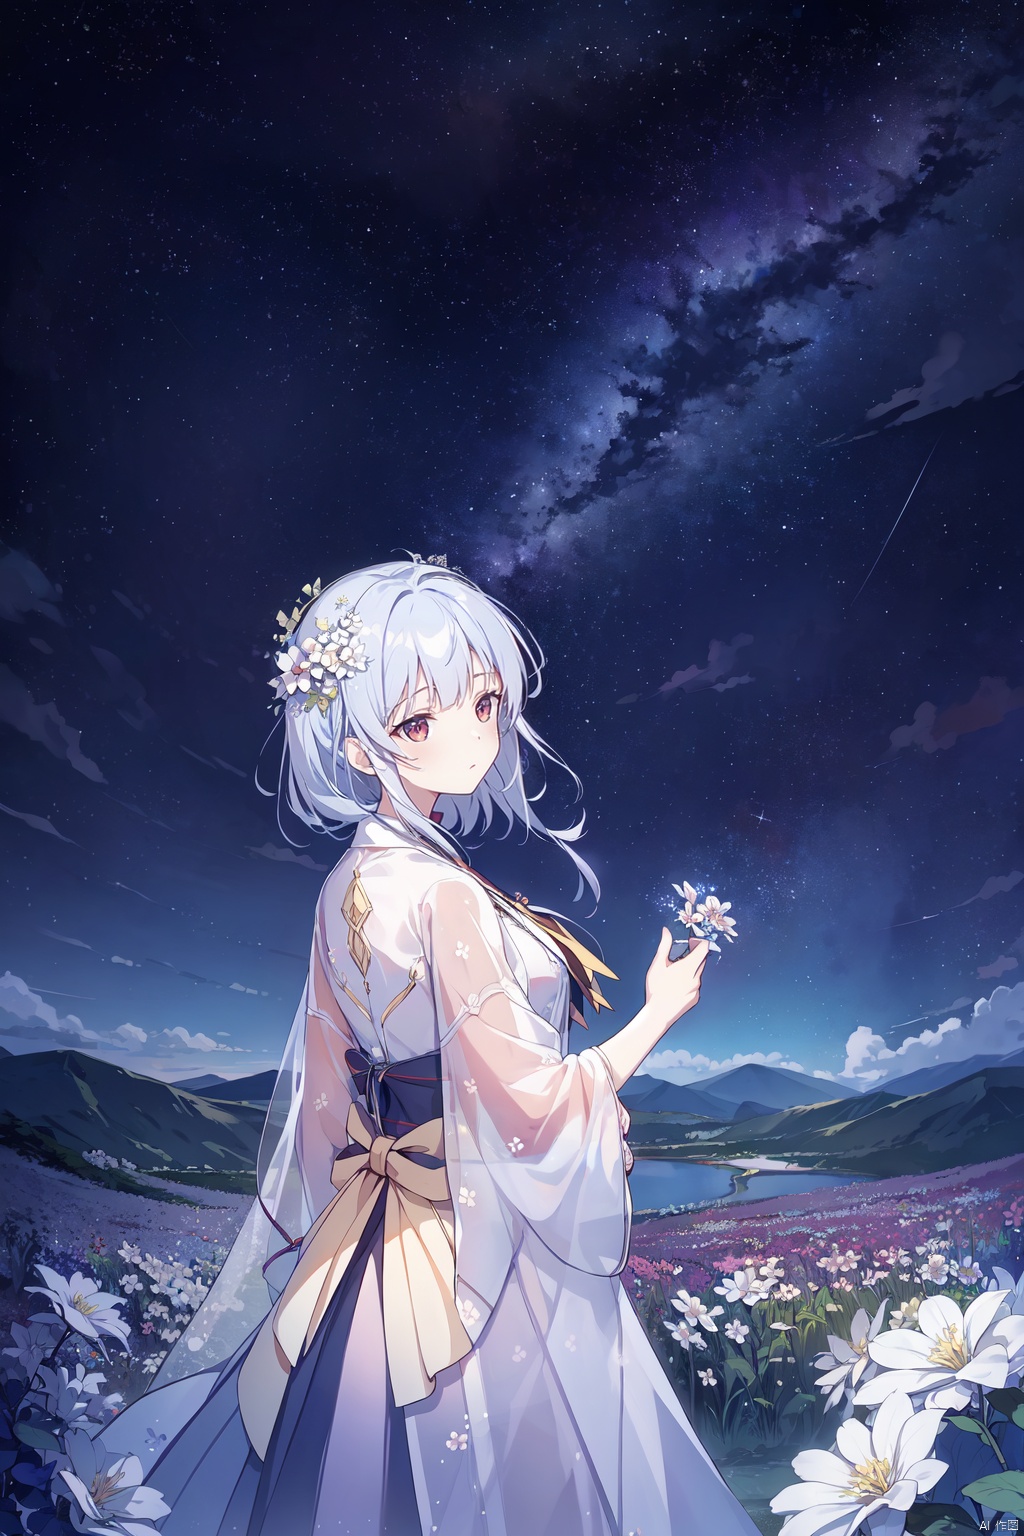 masterpiece, best quality, extremely detailed, anime, midnight, starry sky, clear weather, grasslands, (flower:1.4)(((blooming))), river, hill, ((light particles)), superb view, lora:more_details:0.5, World in a bottle, glowify